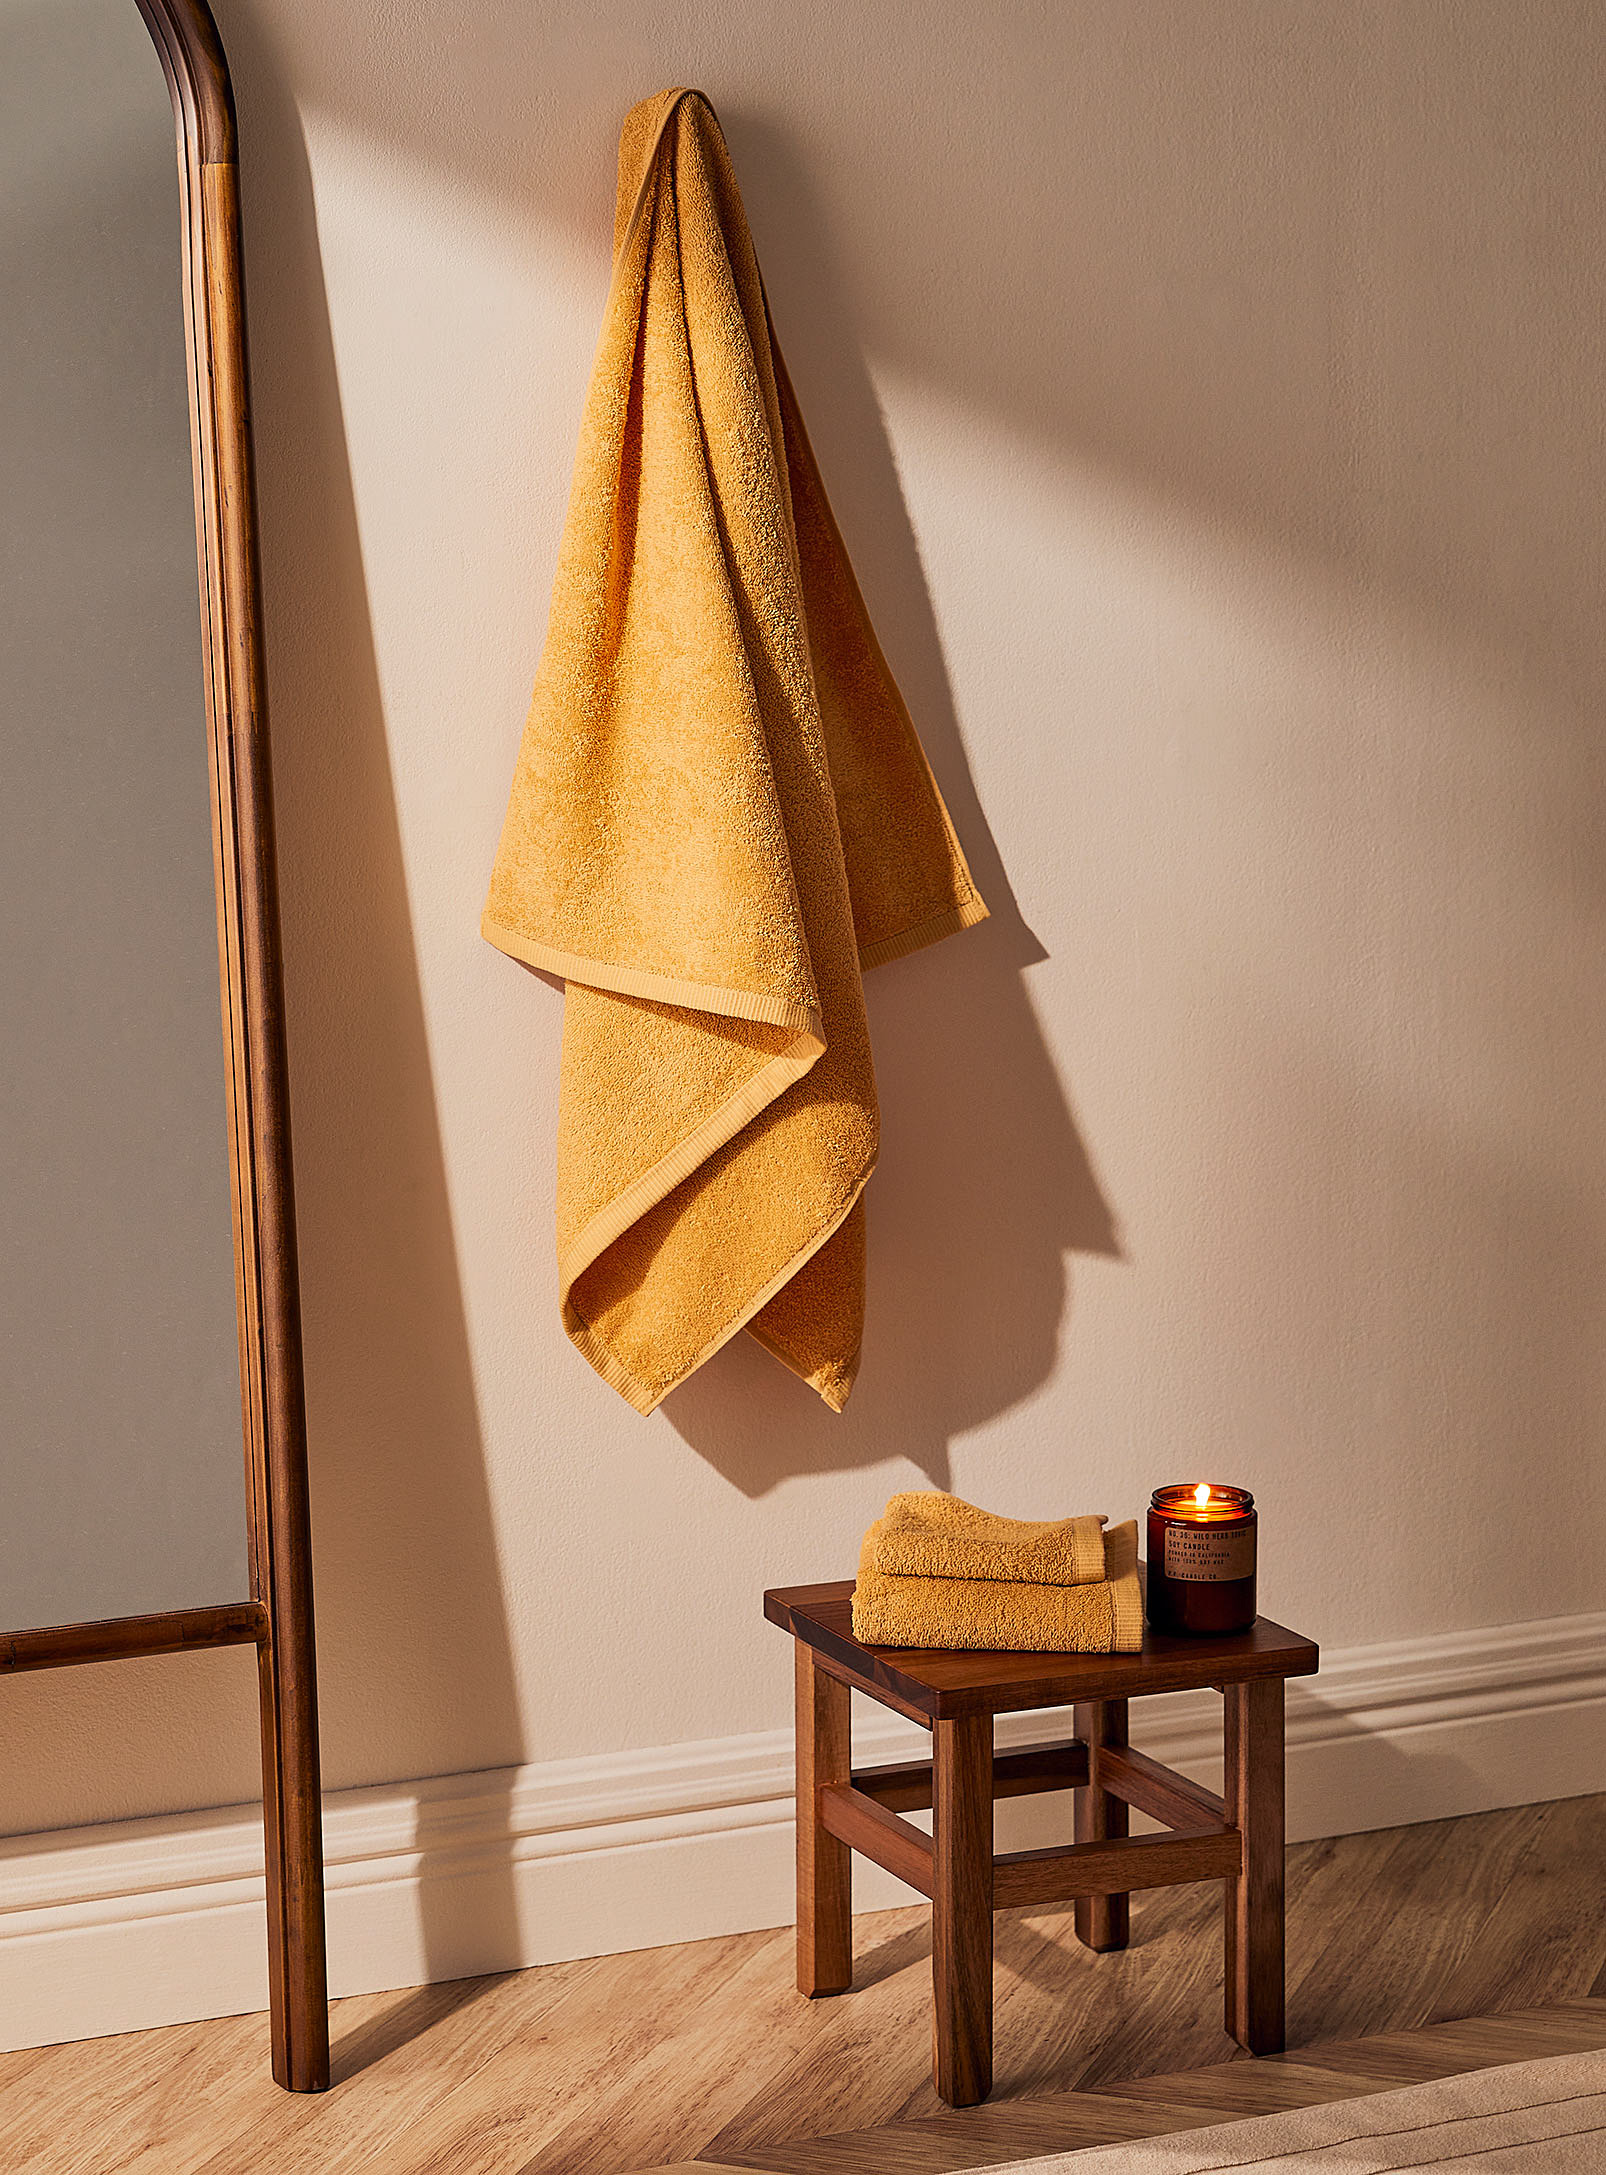 Simons Maison Grooved Trim Towels In Golden Yellow